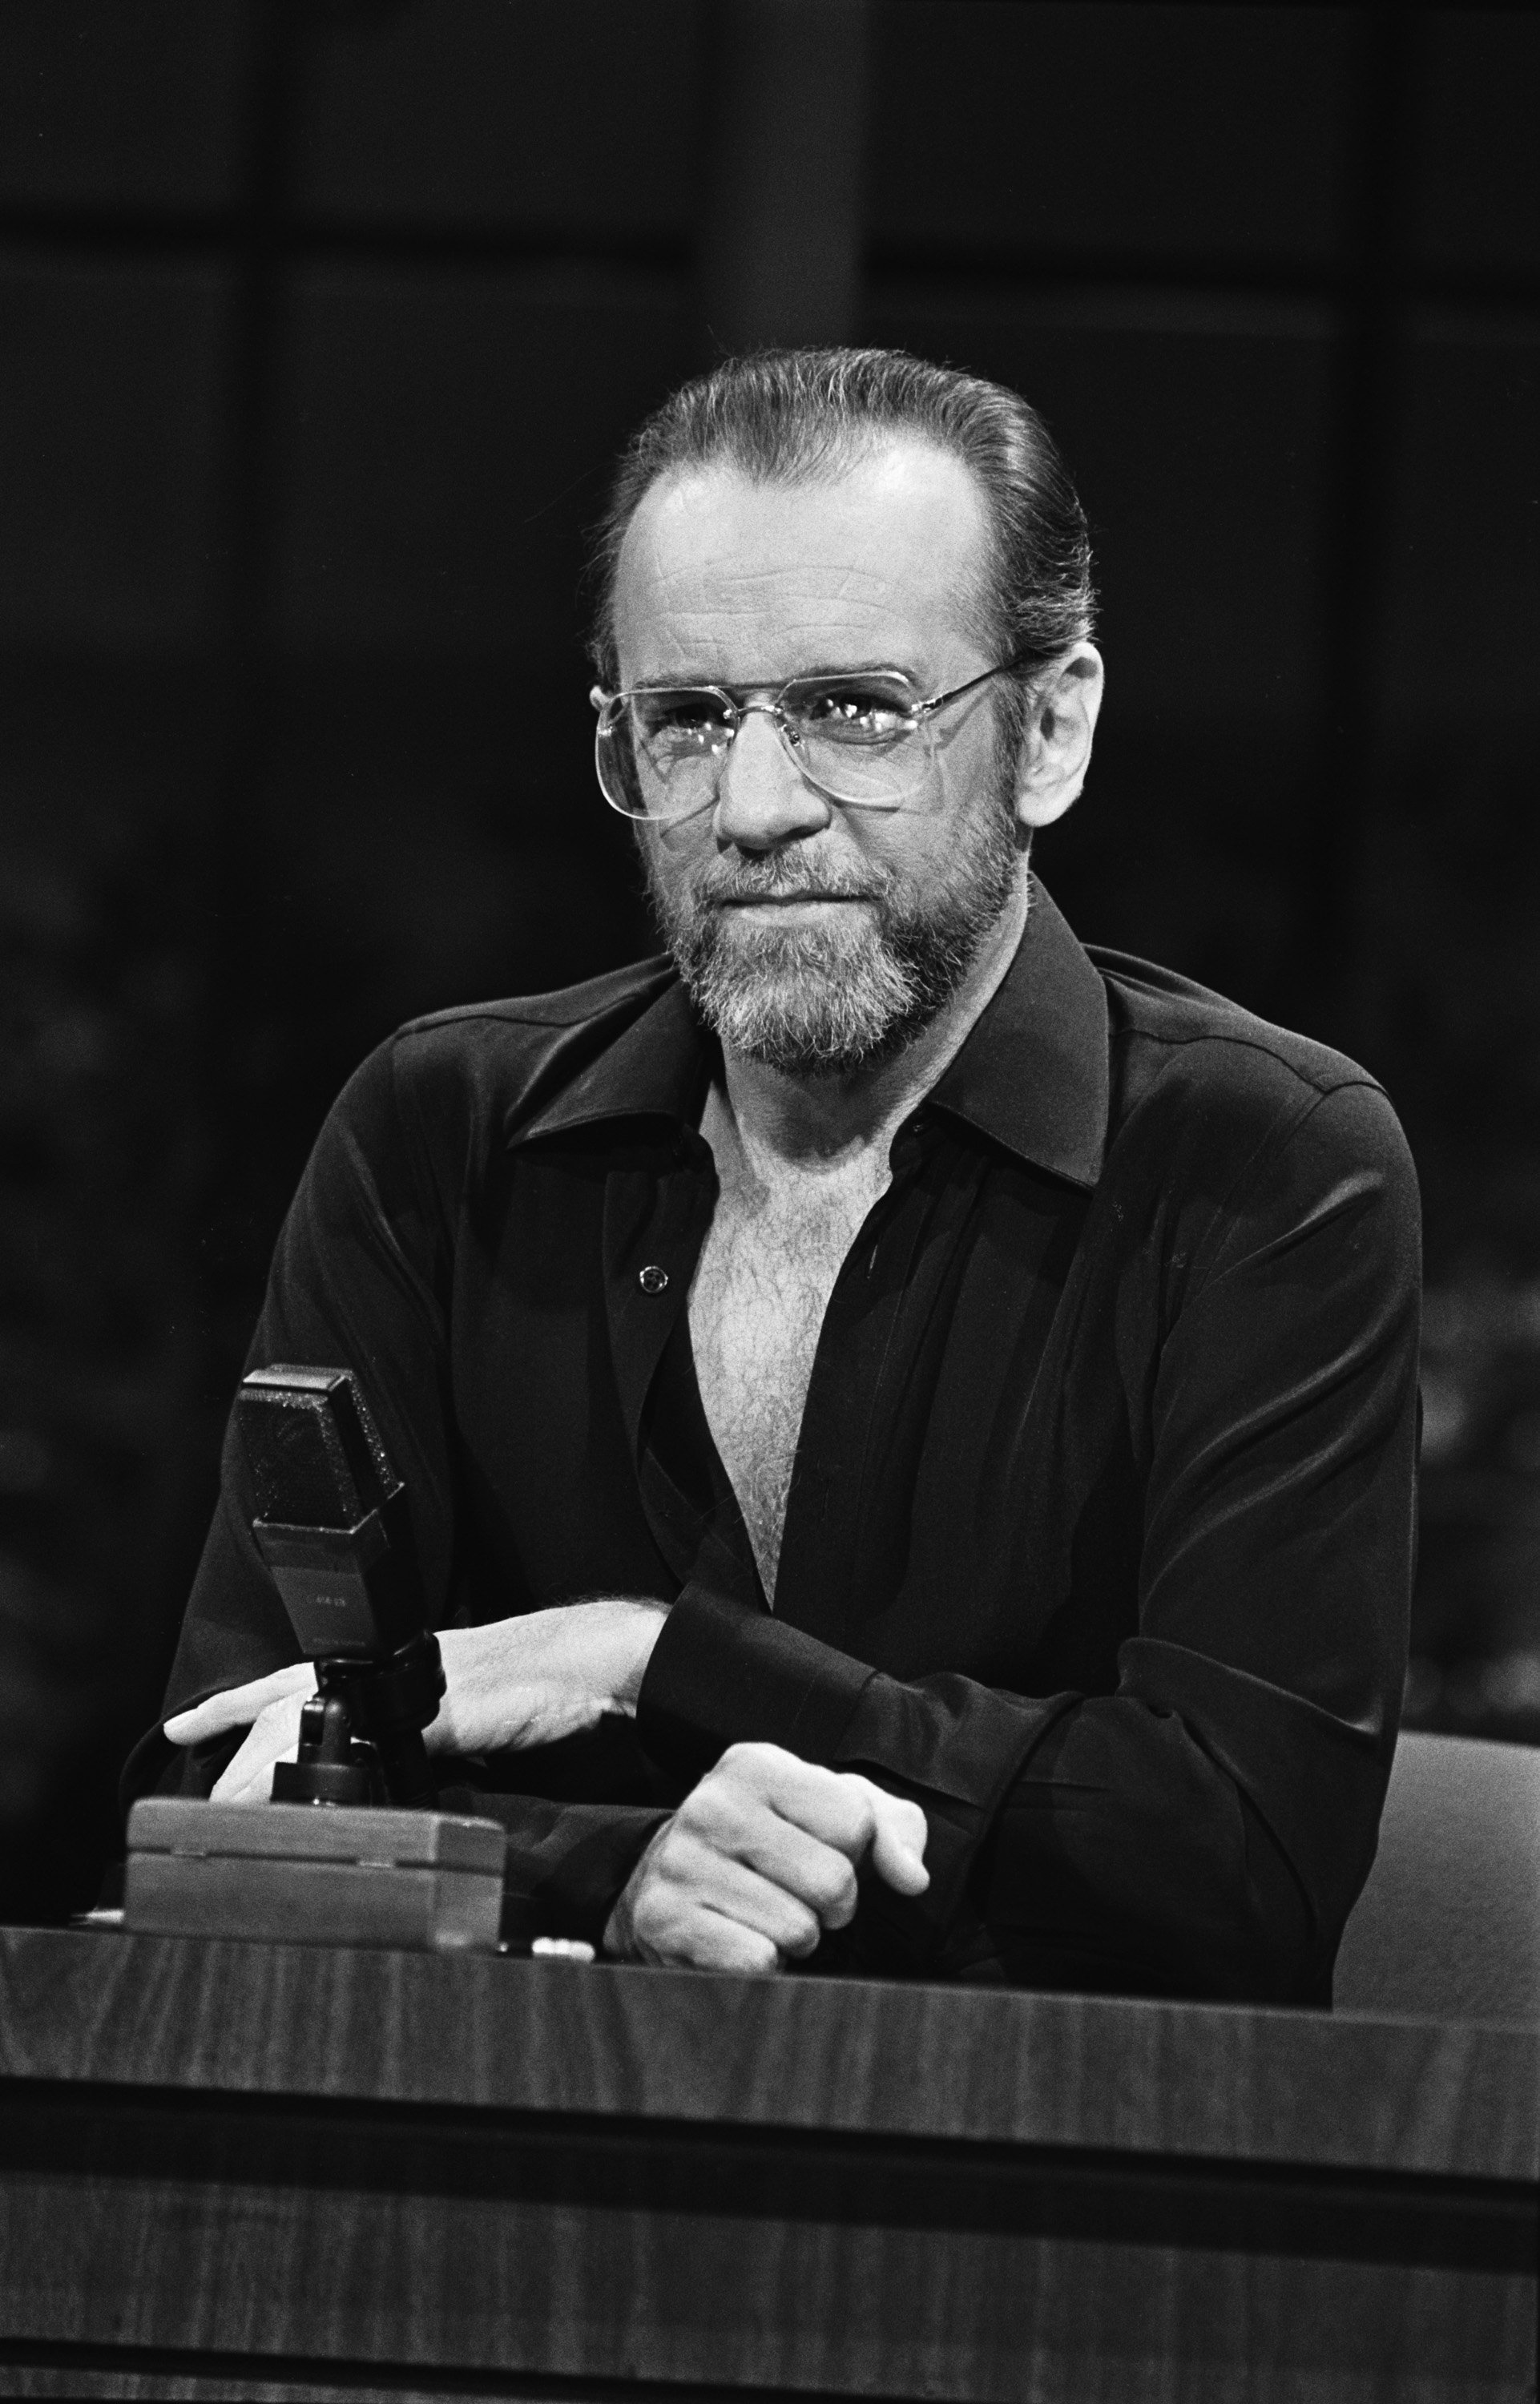 Comedian George Carlin on "The Tonight Show Starring Johnny Carson" March 12, 1989 |  Source: Getty Images